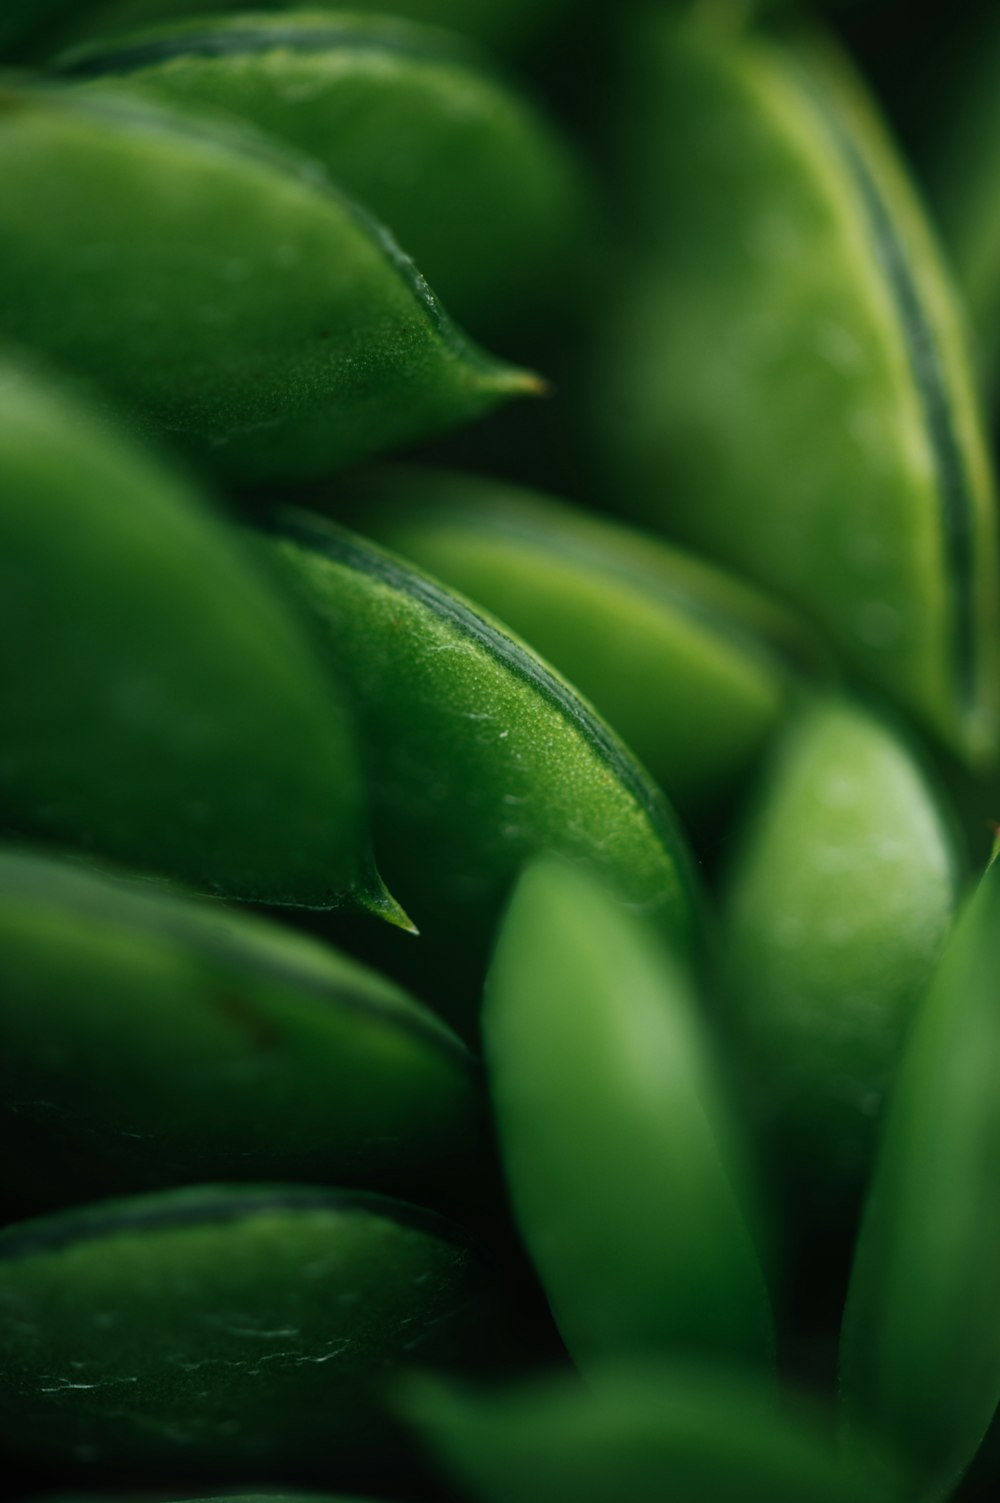 macro photography of green leaves